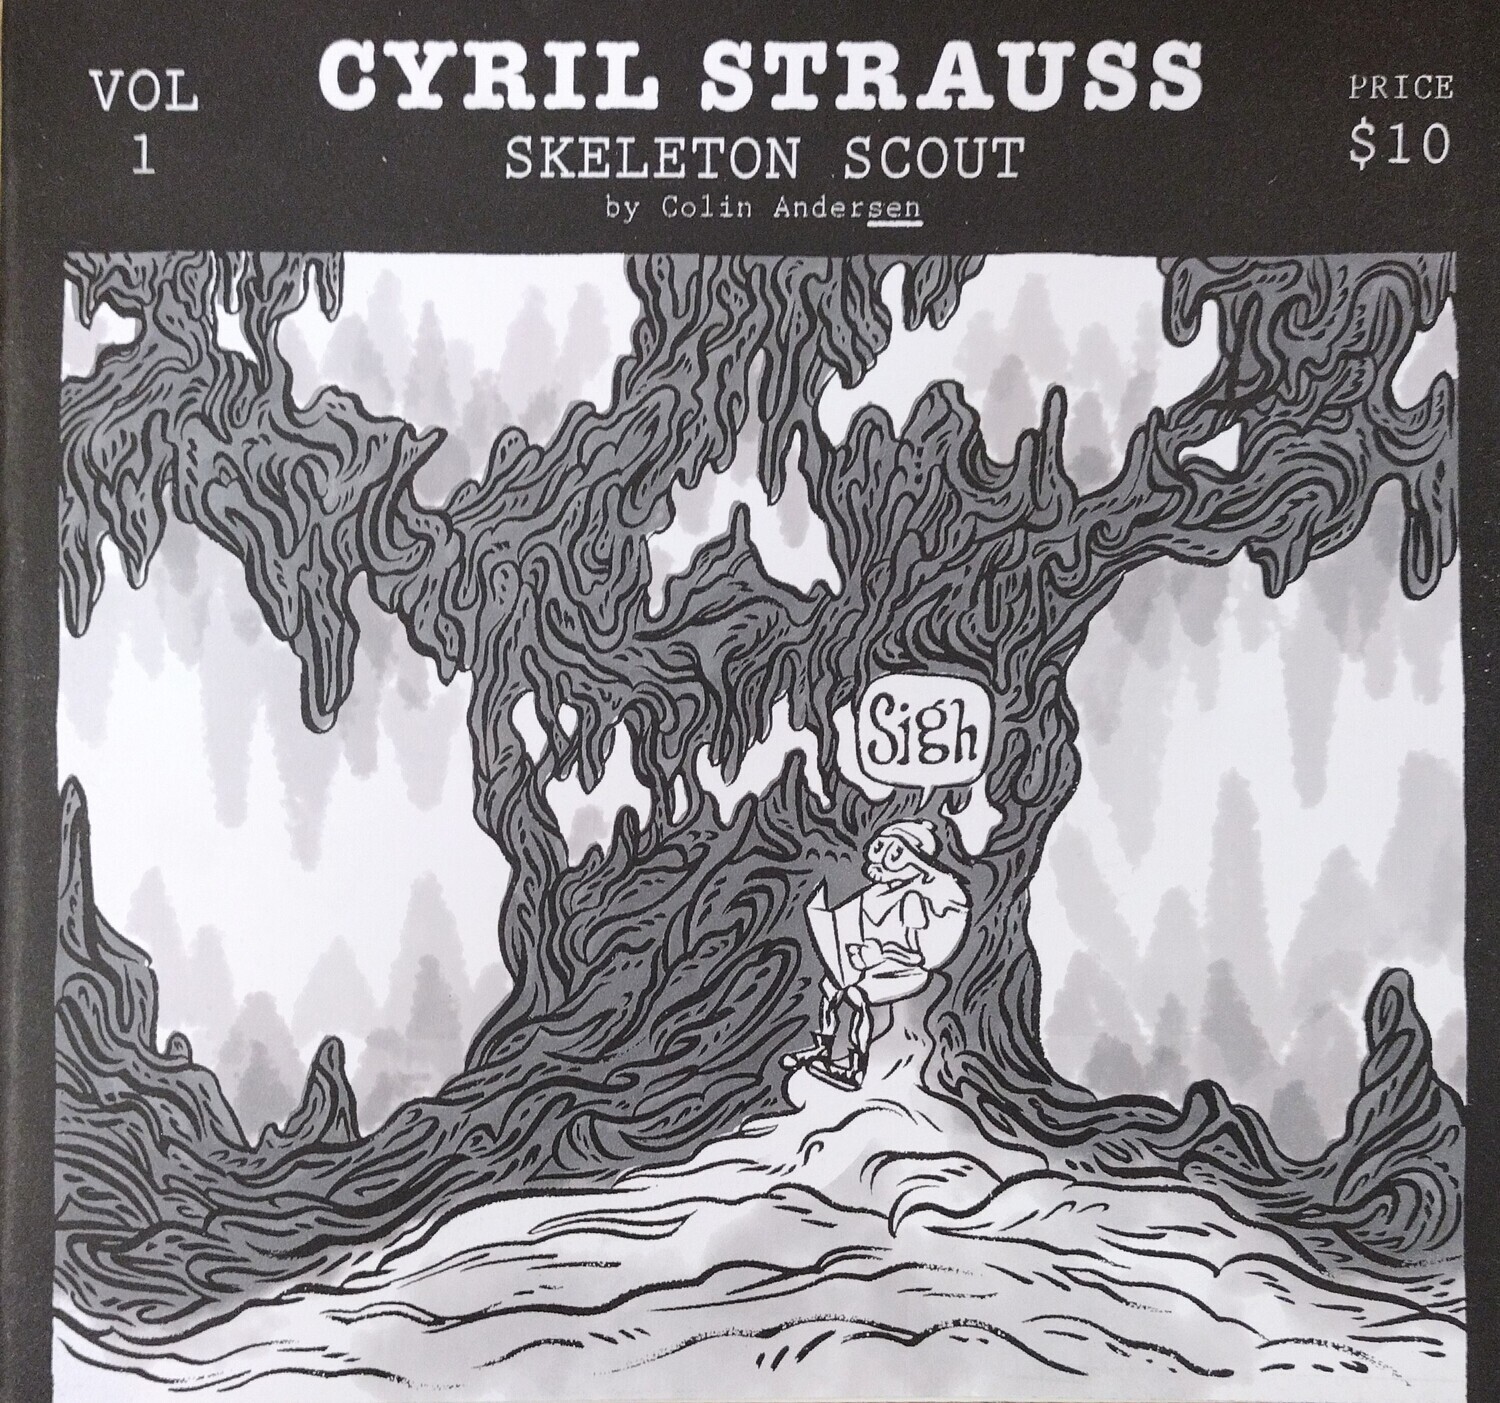 Cyril Strauss: Skeleton Scout: Volume 1 - Book by Colin Anderen